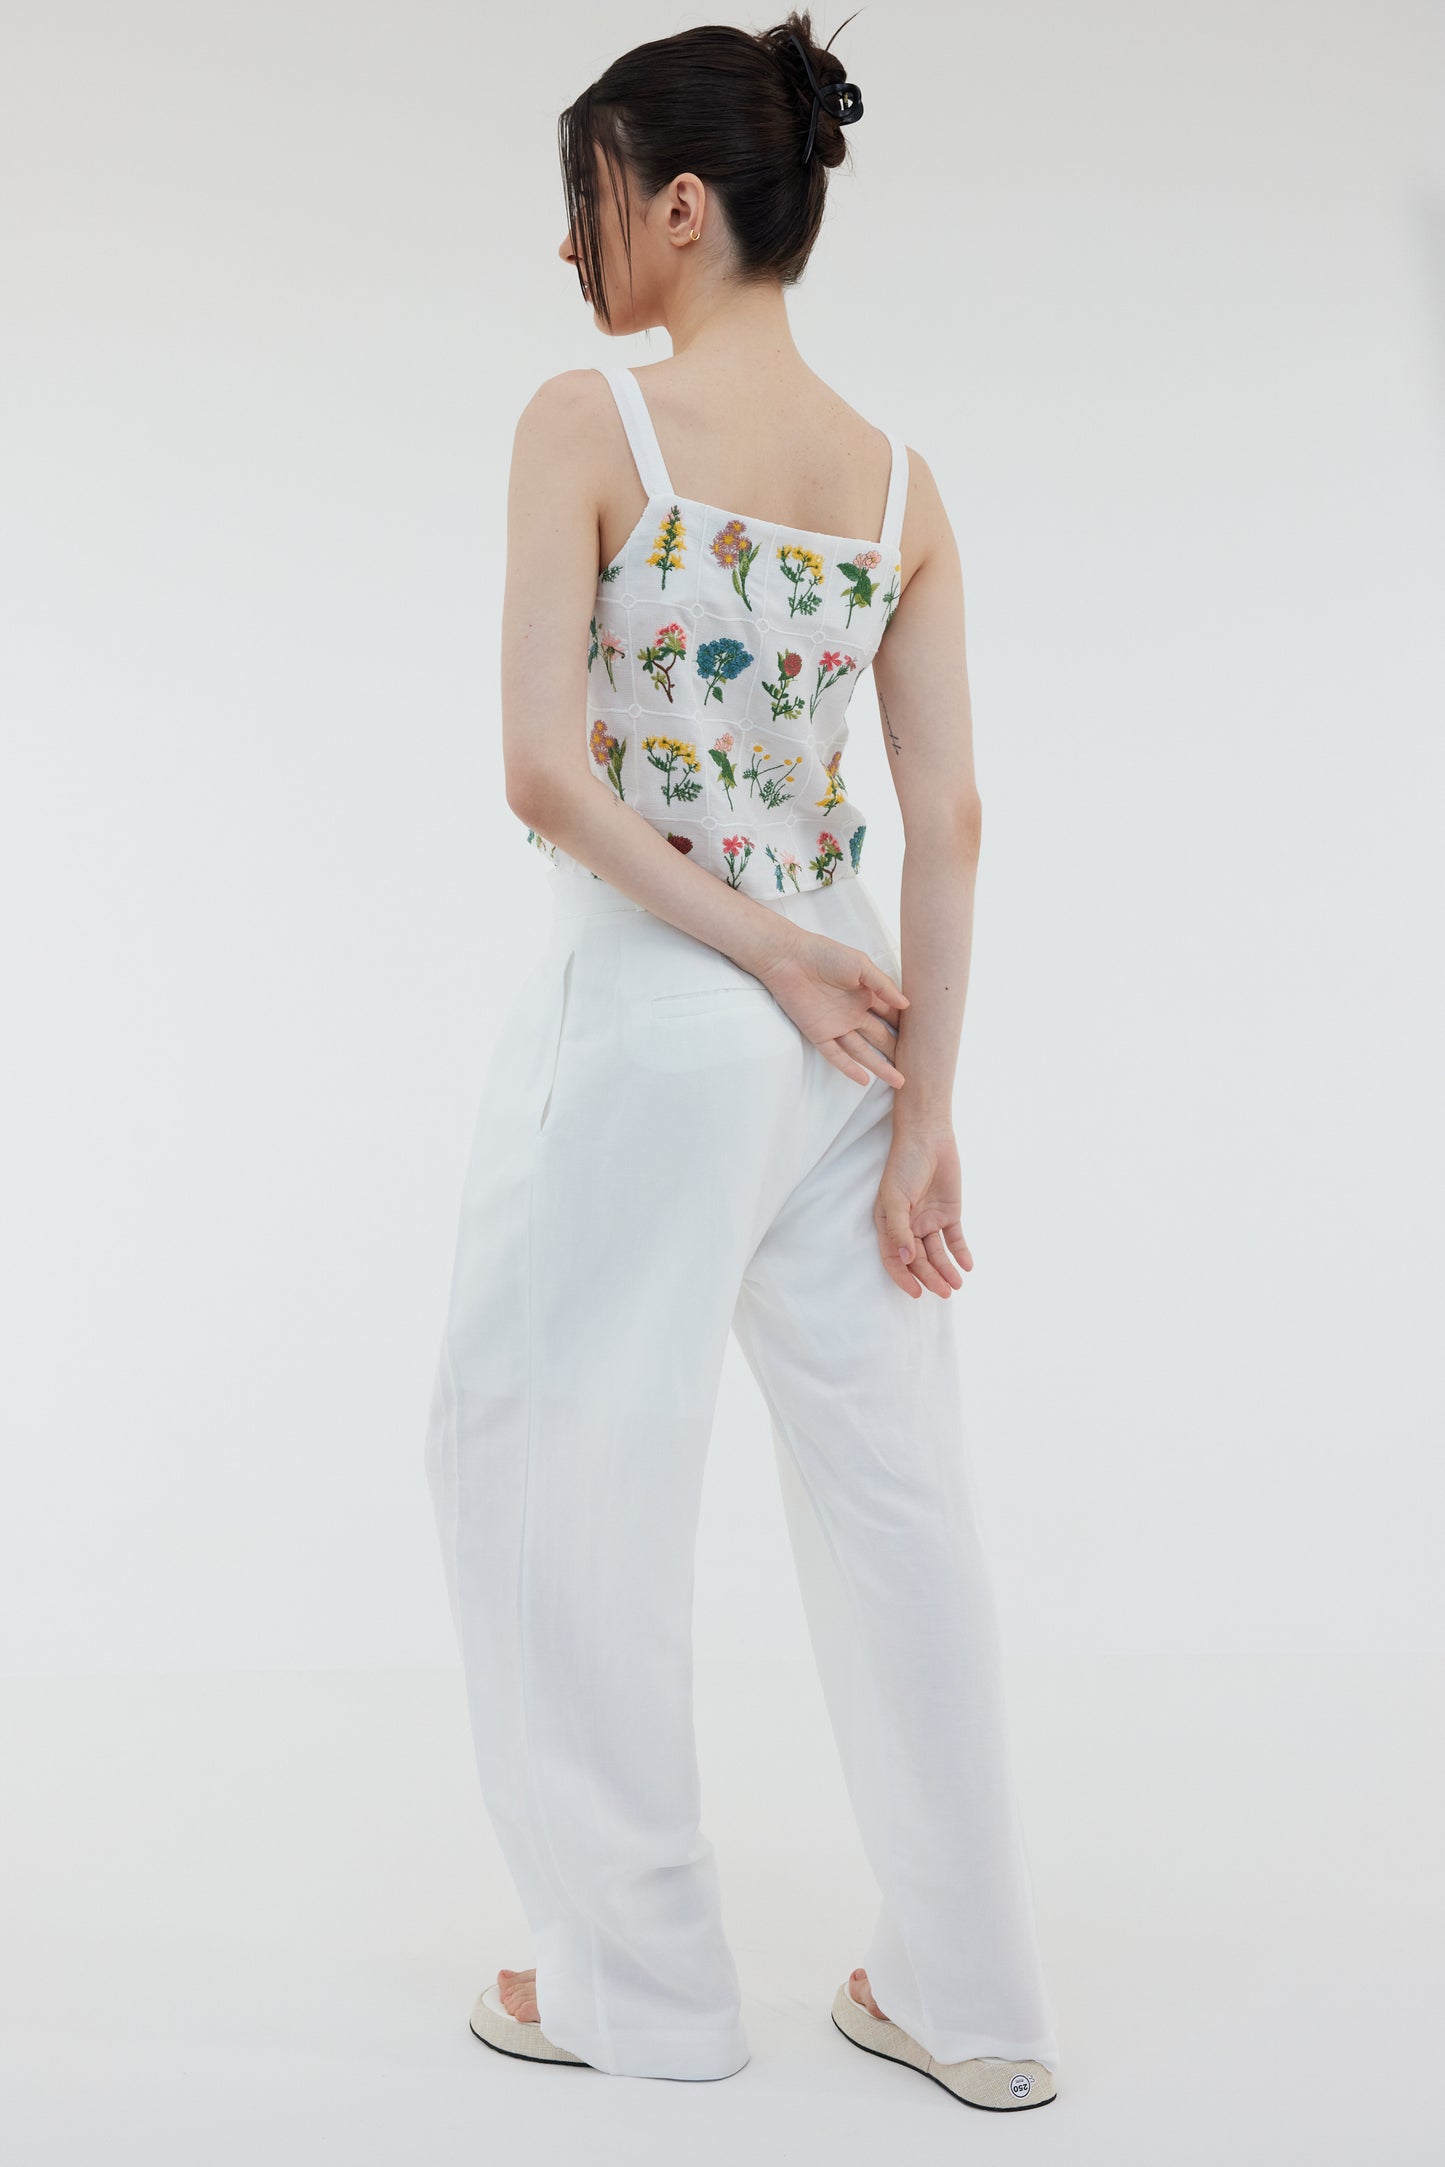 Openwork Embroidered Floral Top, White